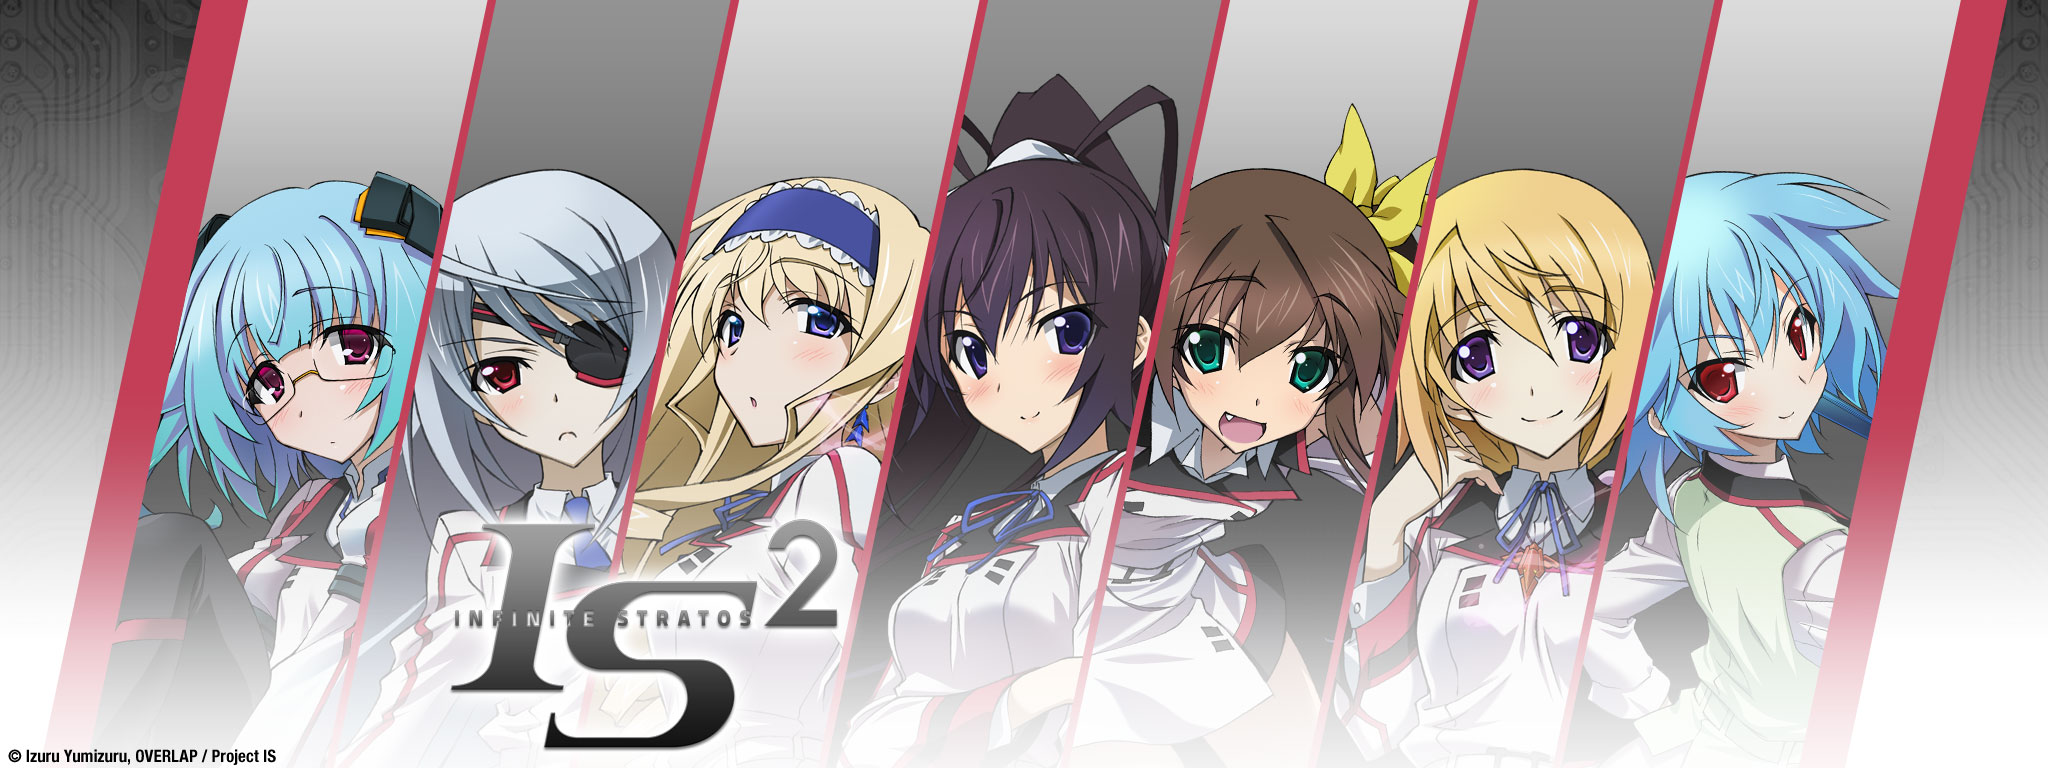 Title Art for Infinite Stratos 2